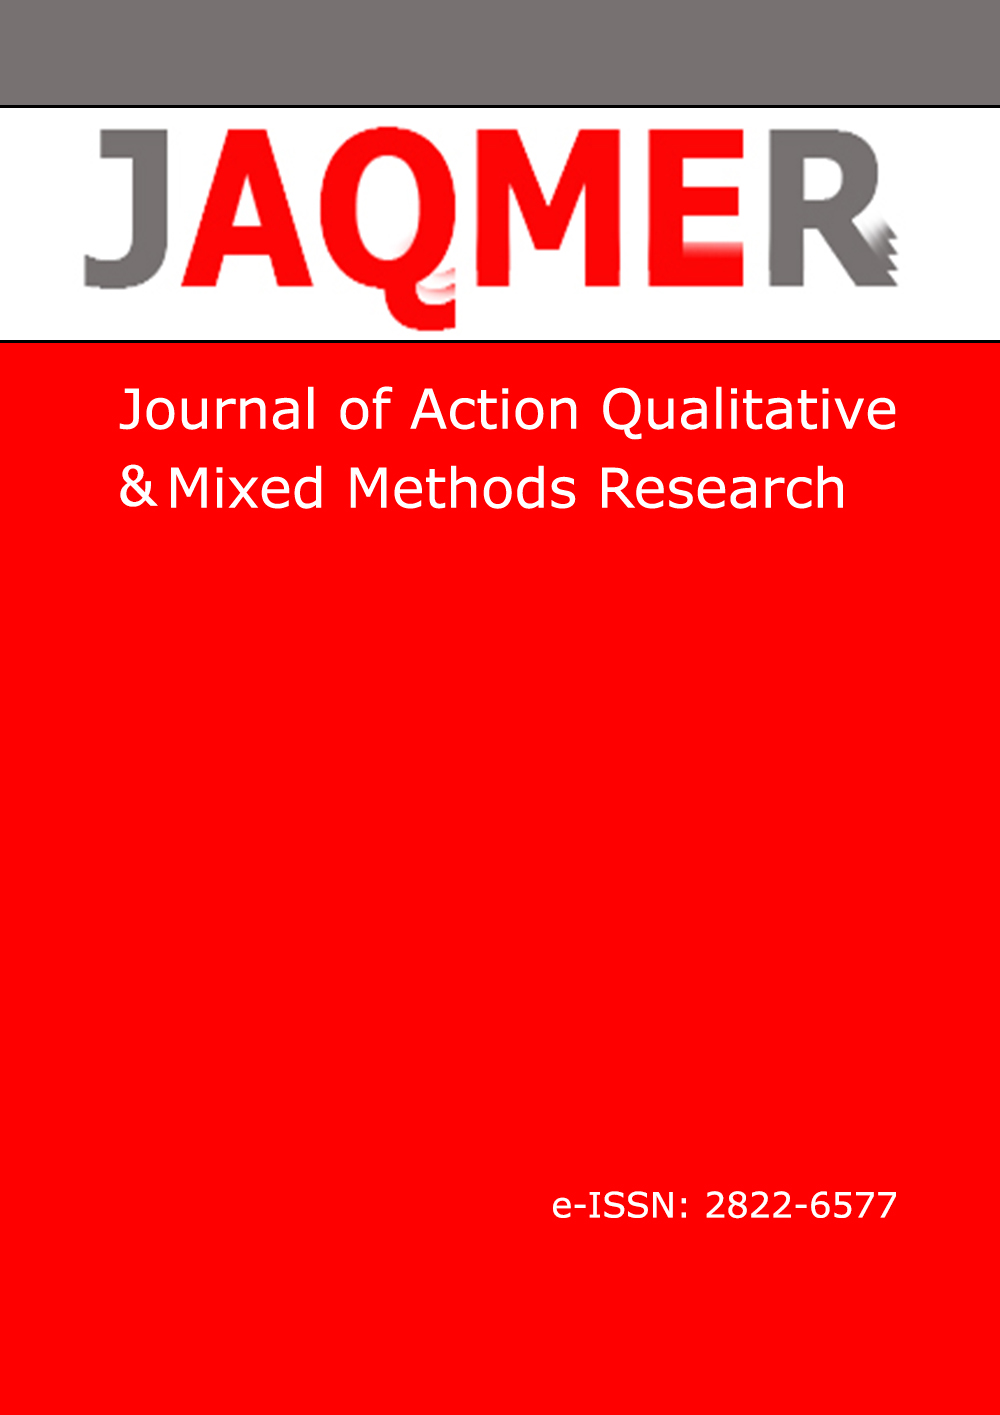 					View Volume 2 Issue 1 (2023): Journal of Action Qualitative & Mixed Methods Research
				